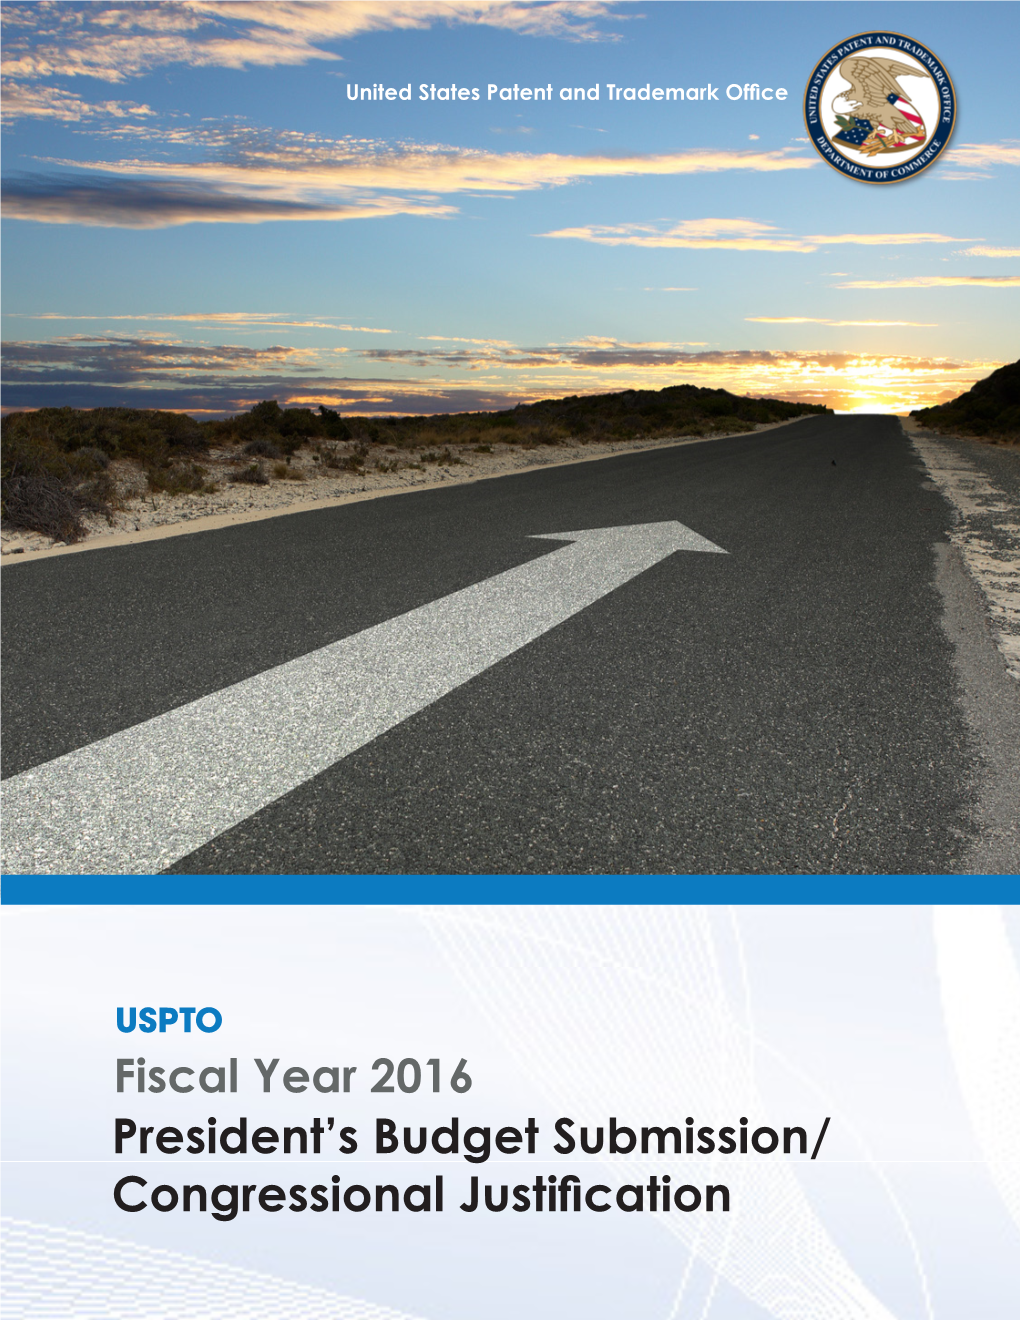 President's Budget Submission/ Congressional Justification